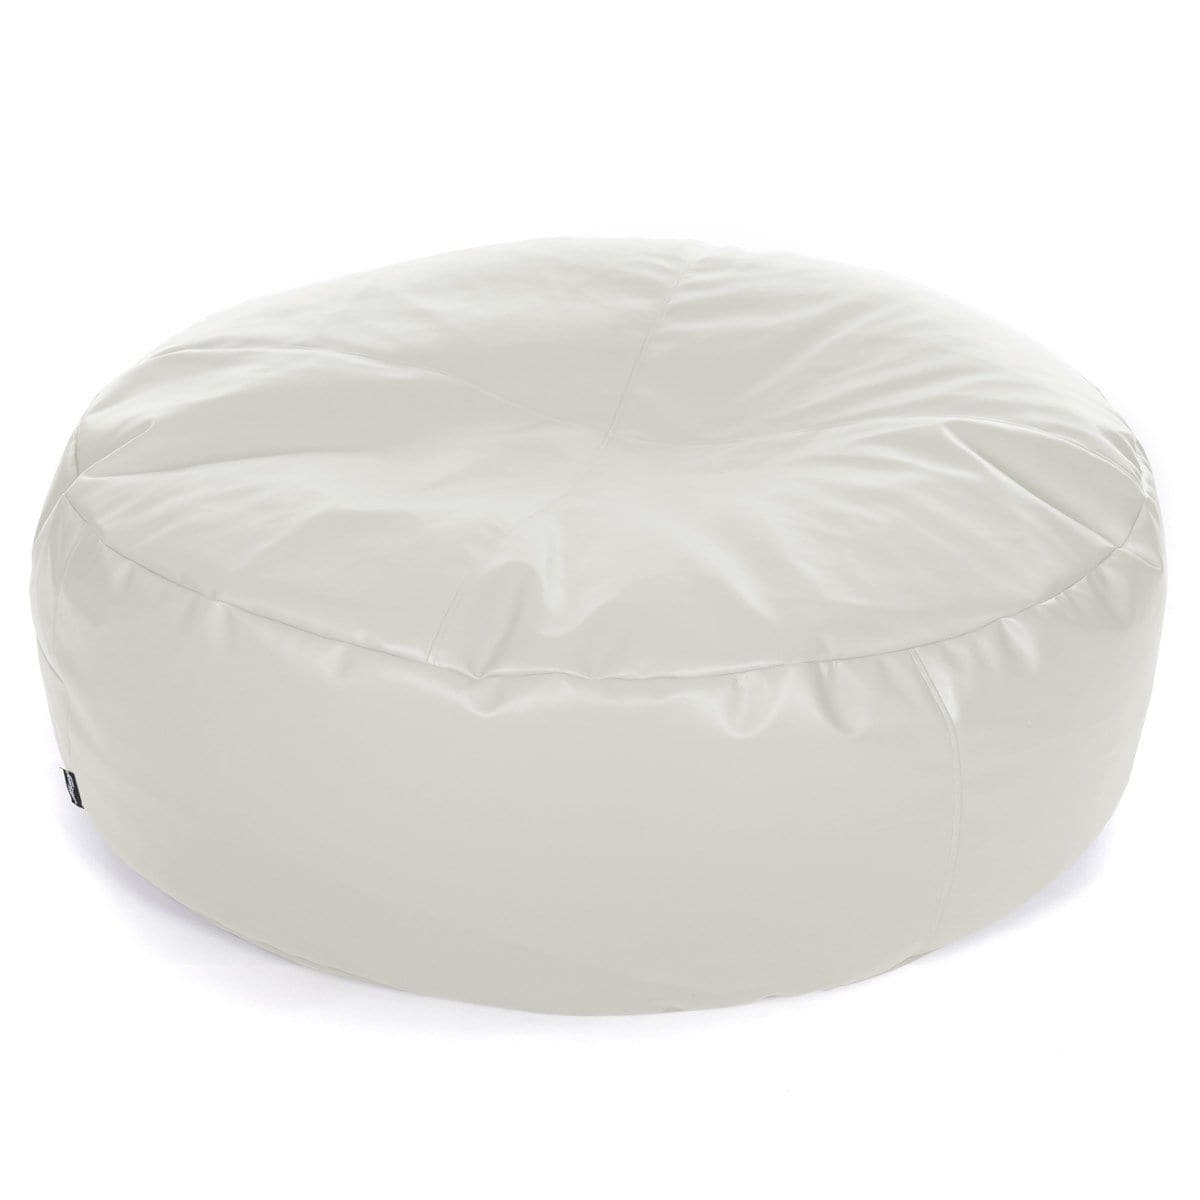 White UV Reflective Beanbag, The White UV Reflective Beanbag is a specialized piece of furniture designed to enhance multi-sensory learning spaces. Its unique features make it an excellent addition to sensory rooms, offering both comfort and a visual spectacle when used with UV lighting. Key Features: UV Reflective: The beanbag is crafted from a UV-reflective material that changes color under UV lighting, making it an eye-catching and fascinating element in any sensory room. Therapeutic Benefits: The beanba